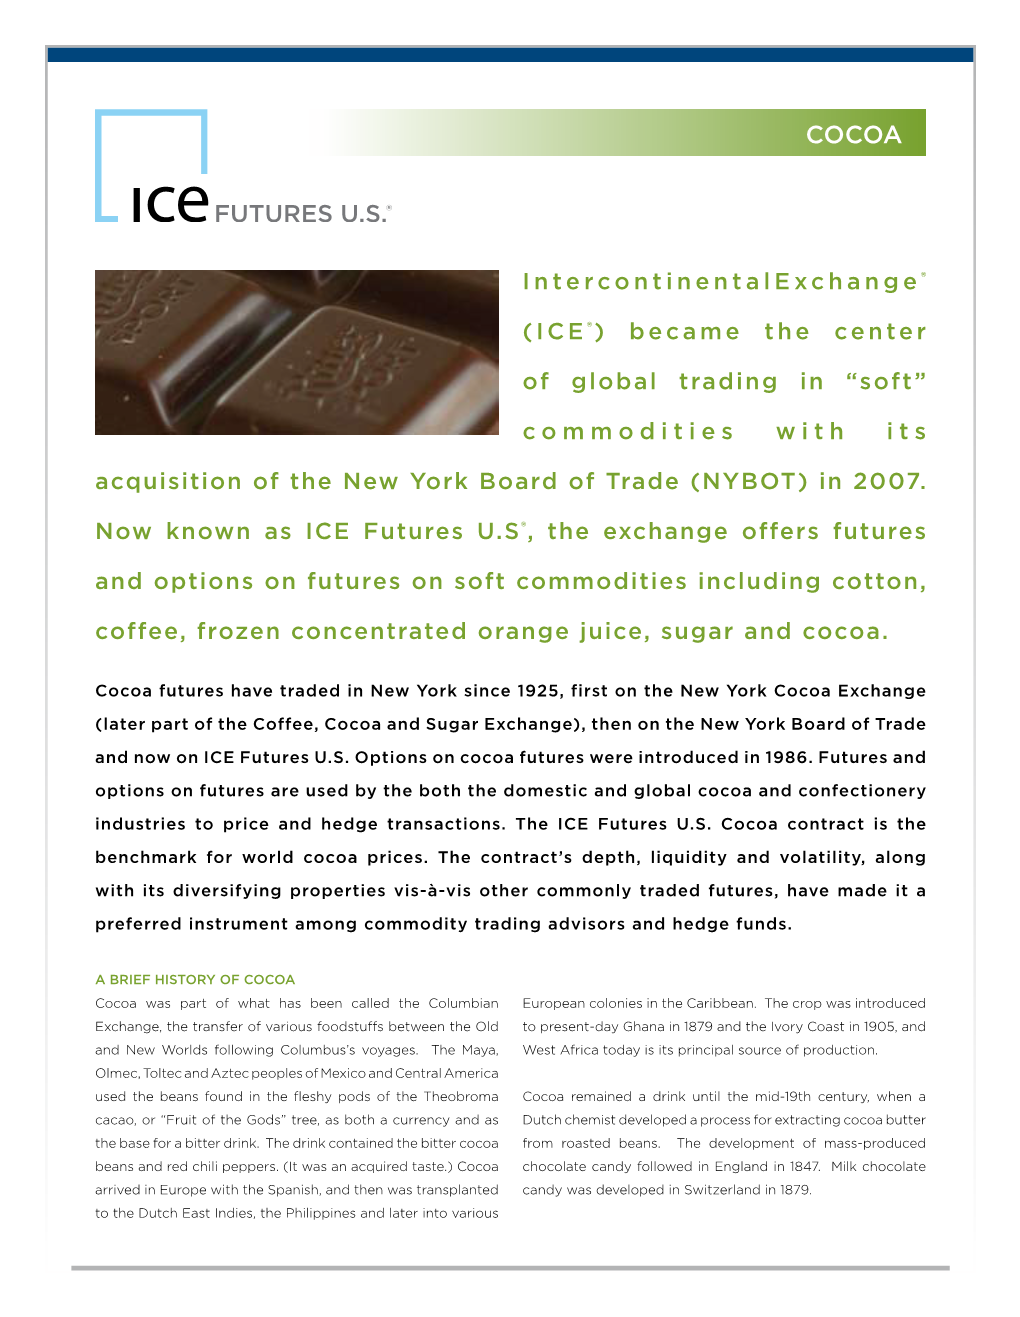 (ICE®) Became the Center of Global Trading in “Soft” Commodities with Its